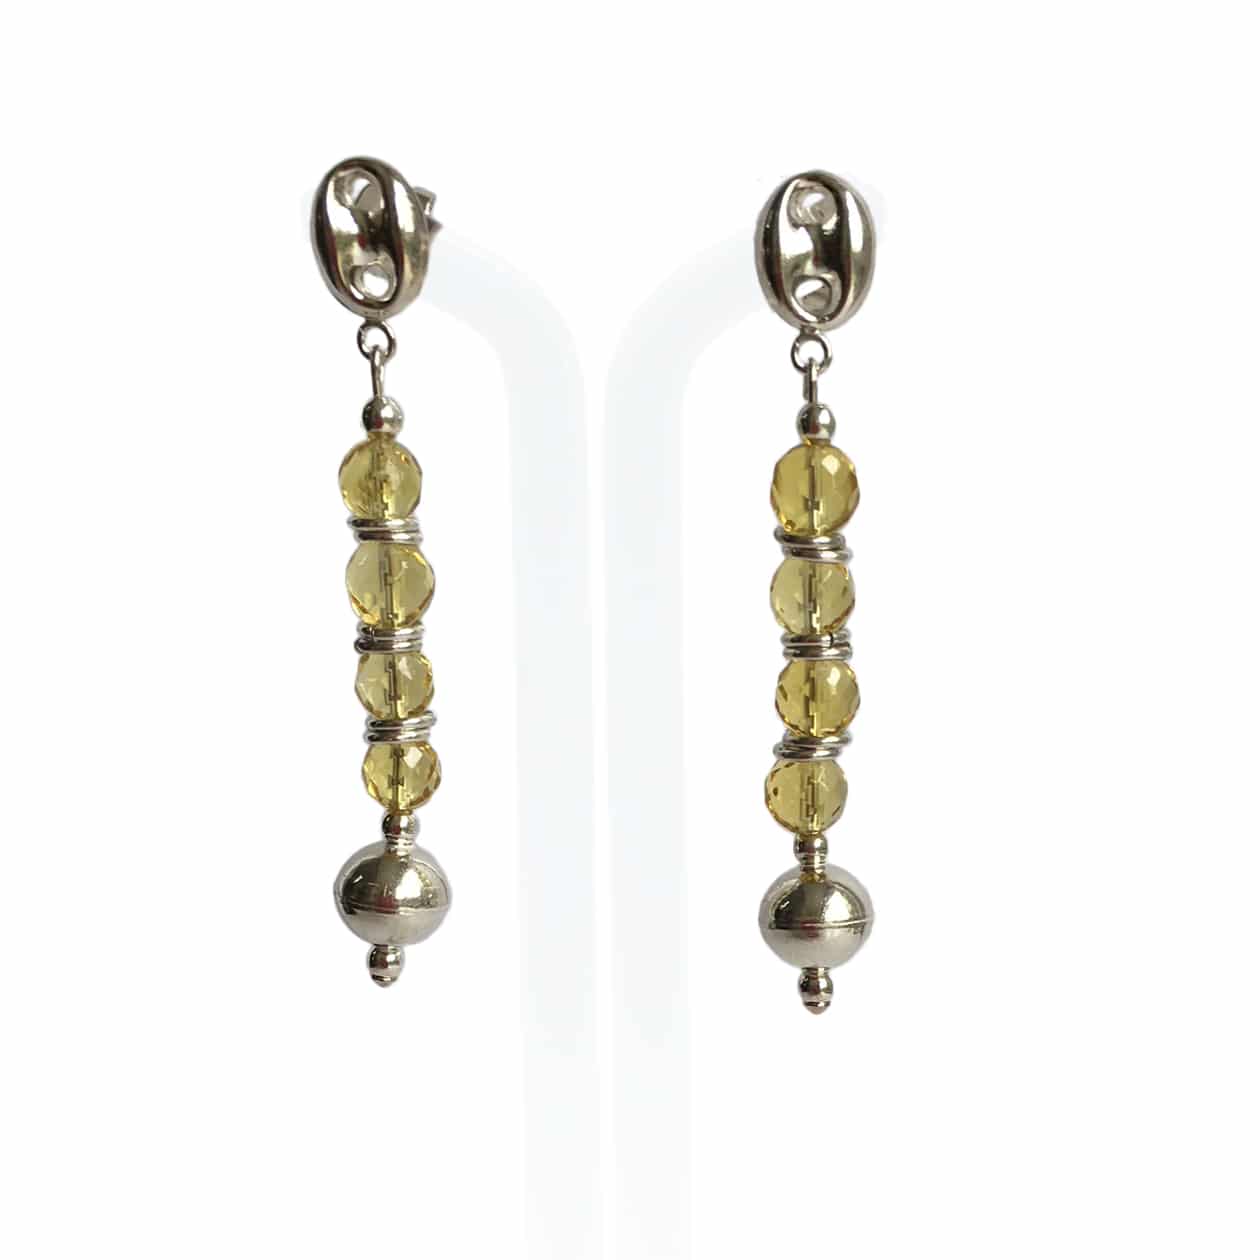 Earrings with citrine and 925 silver; handmade. Exclusive piece.